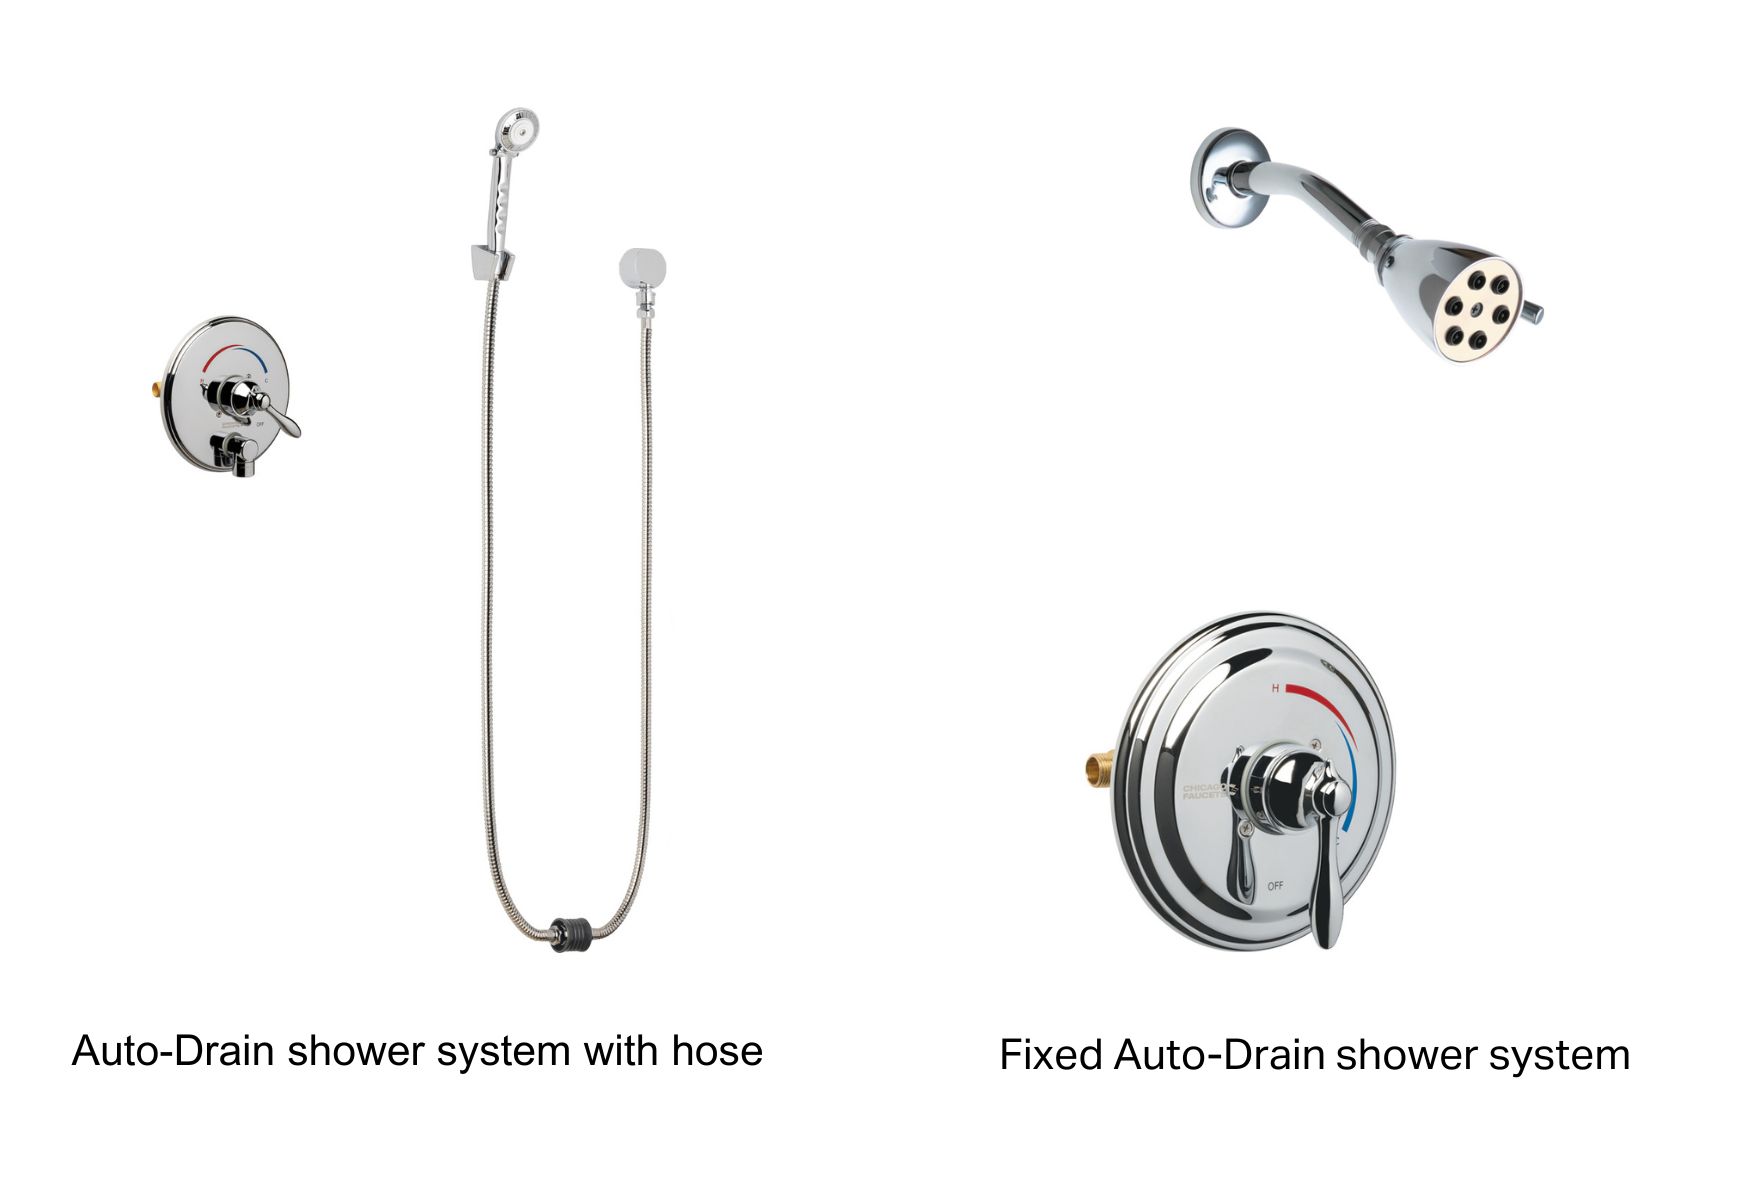 Auto-drain shower systems